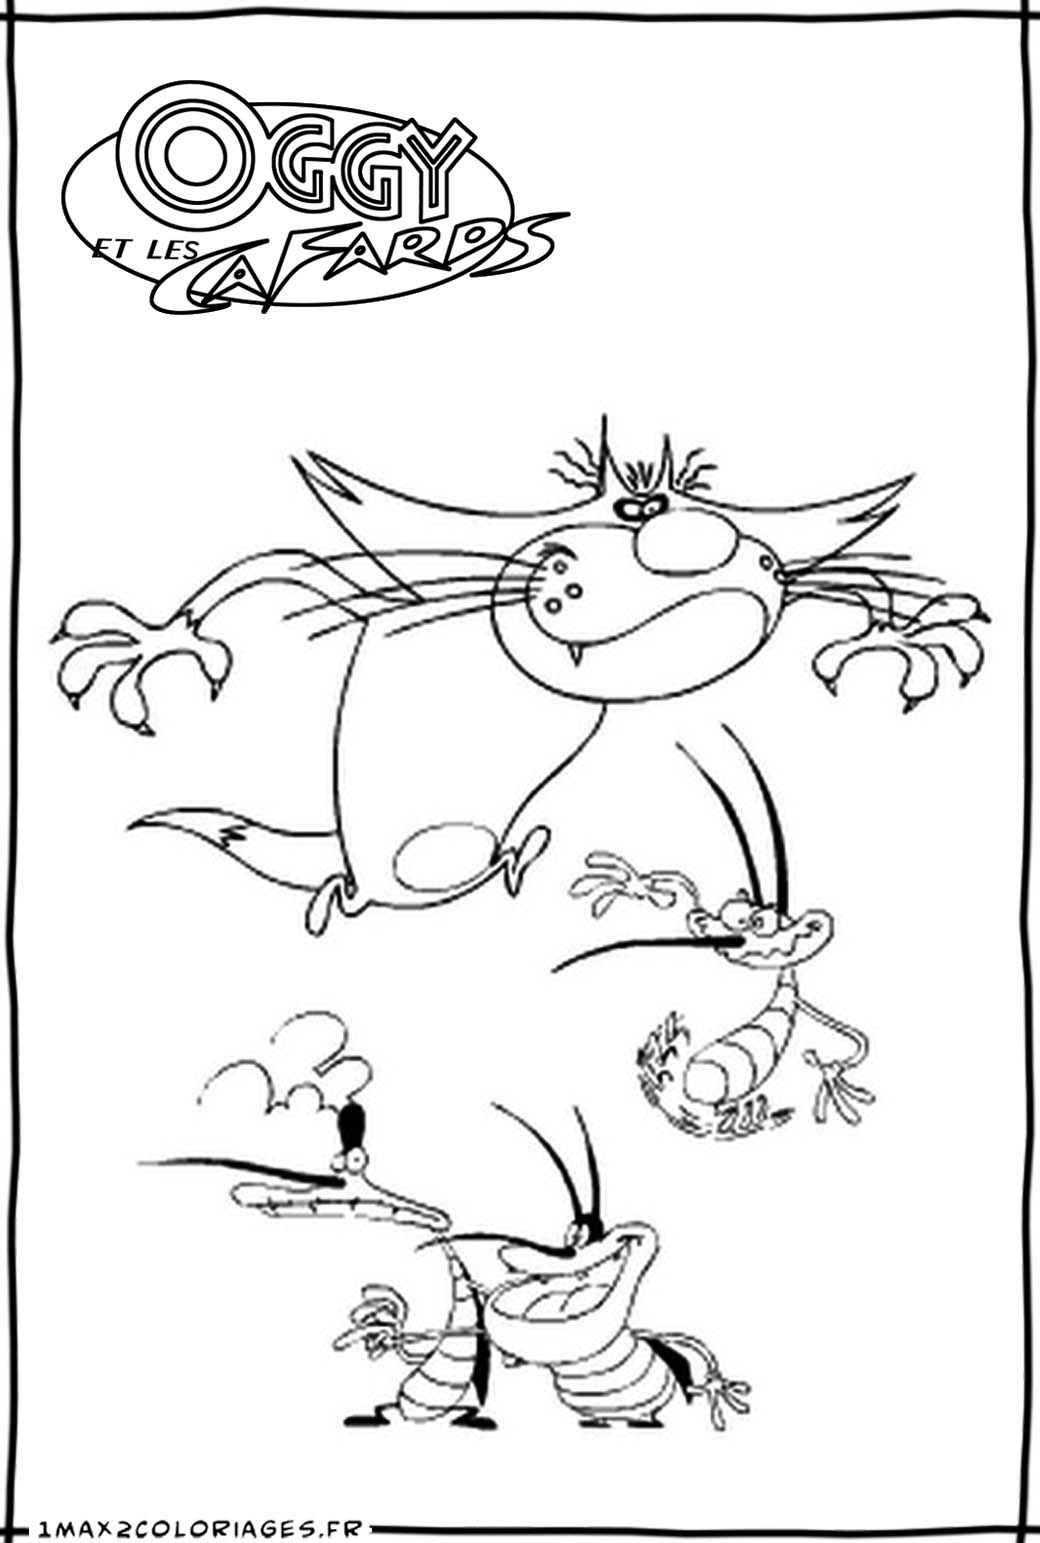 Free Oggy And The Cockroaches coloring page to print and color, for kids